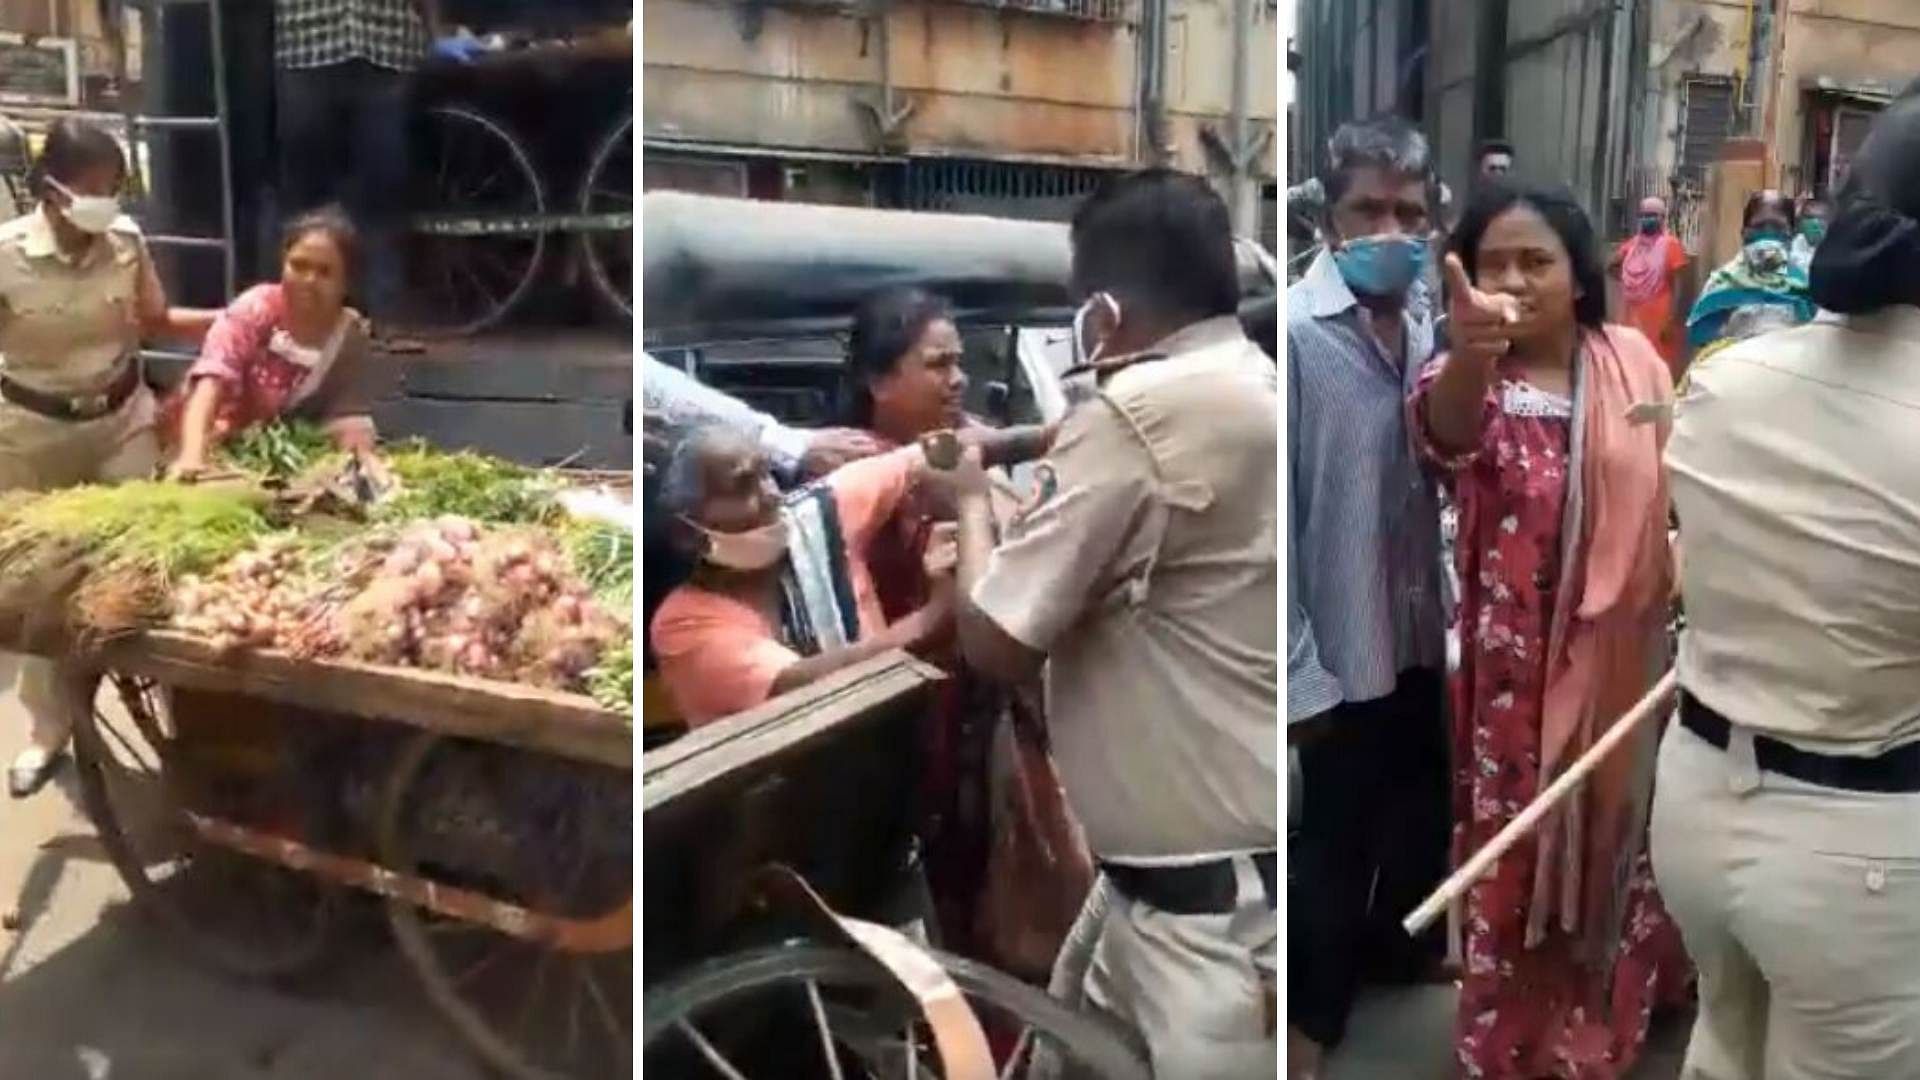 A scuffle broke out between vegetable vendors and BMC and police personnel in Mumbai’s Mankhurd area